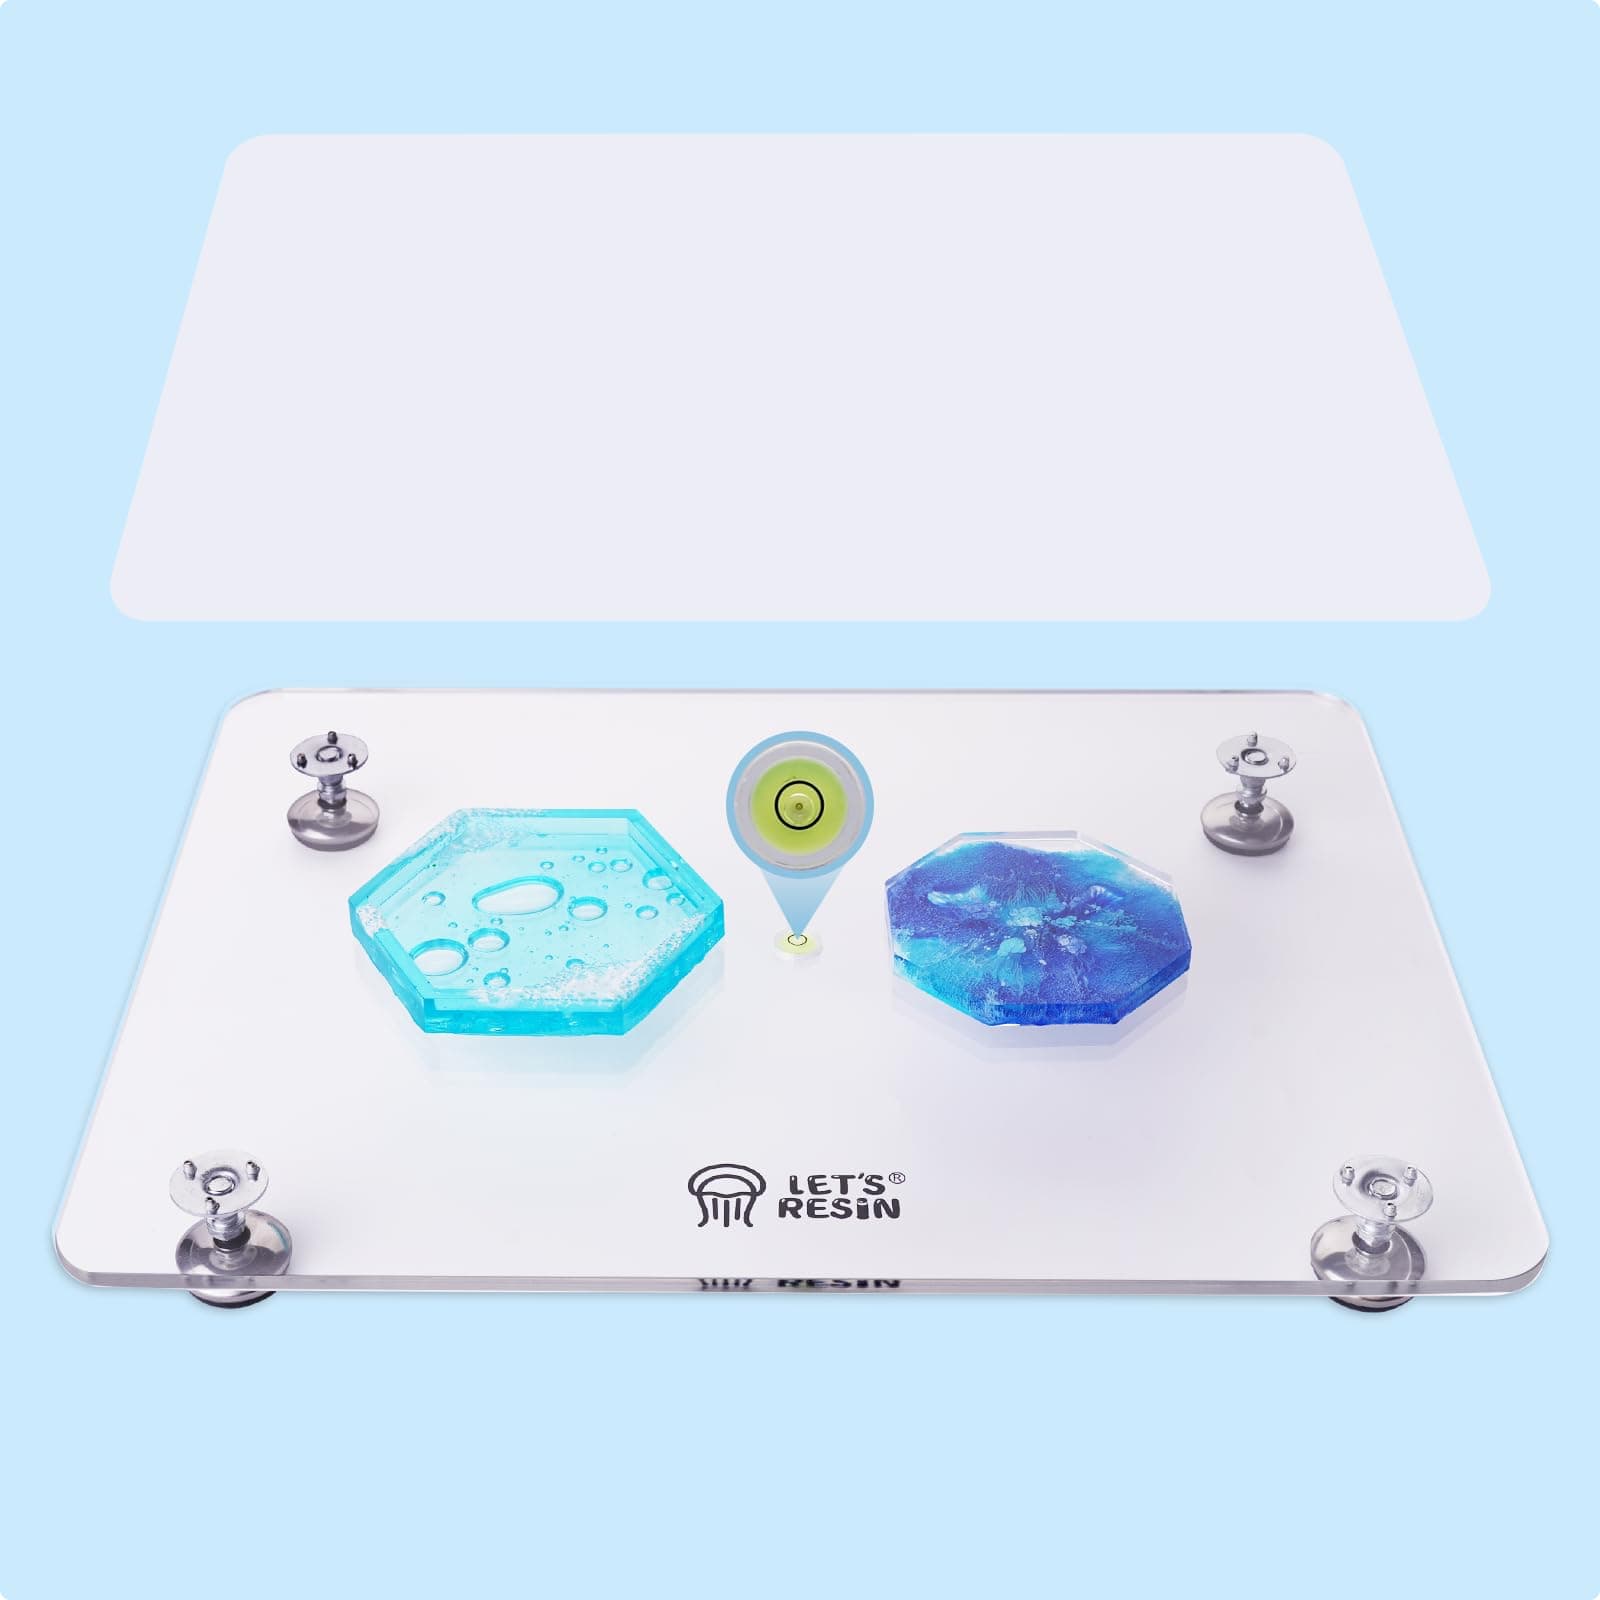 Leveling Board for Epoxy Resin DIY Art Level Surface Board 16''x